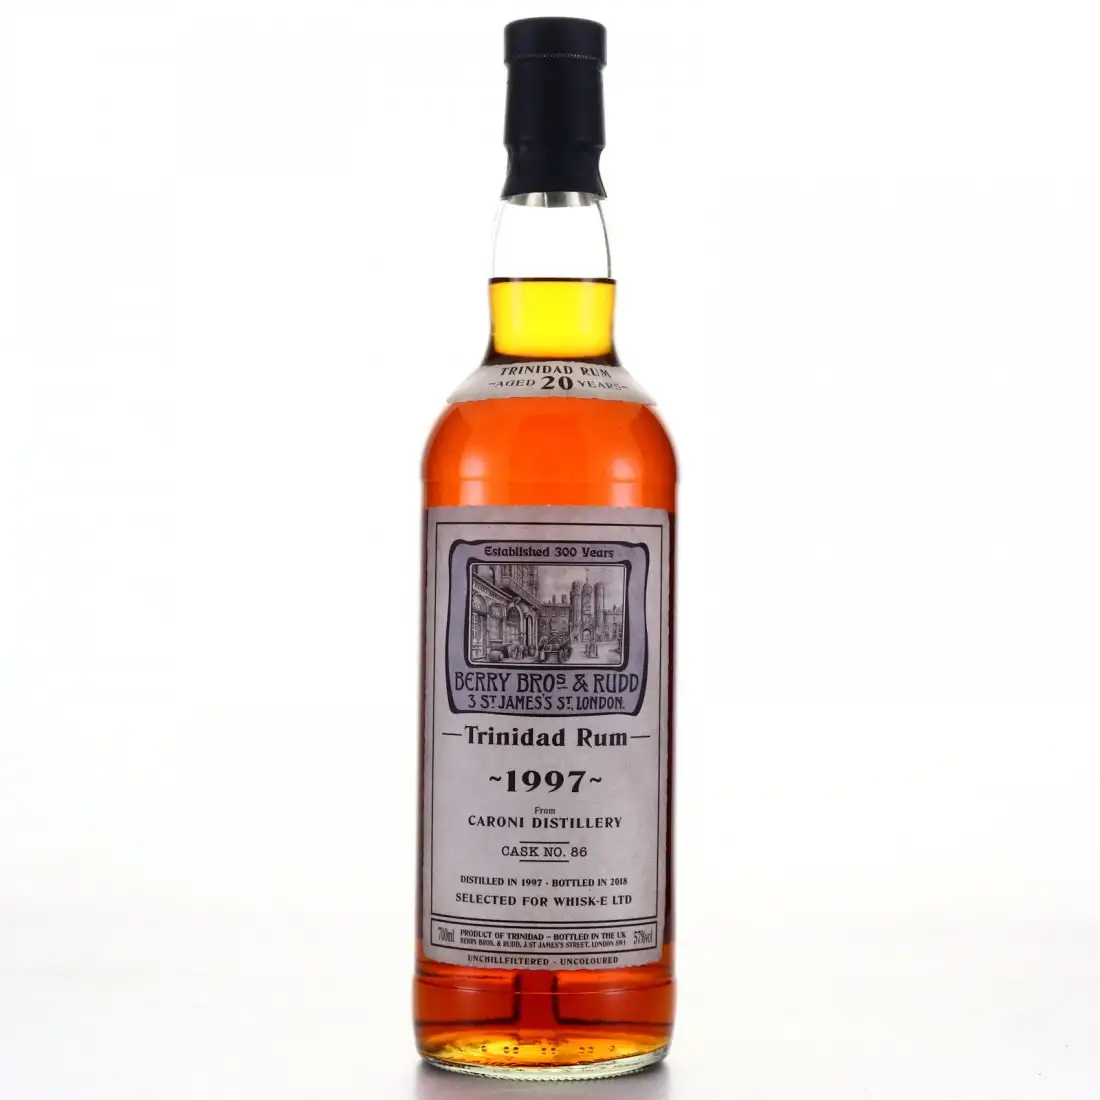 Image of the front of the bottle of the rum Trinidad Rum (Selected for Whisky-E LTD)